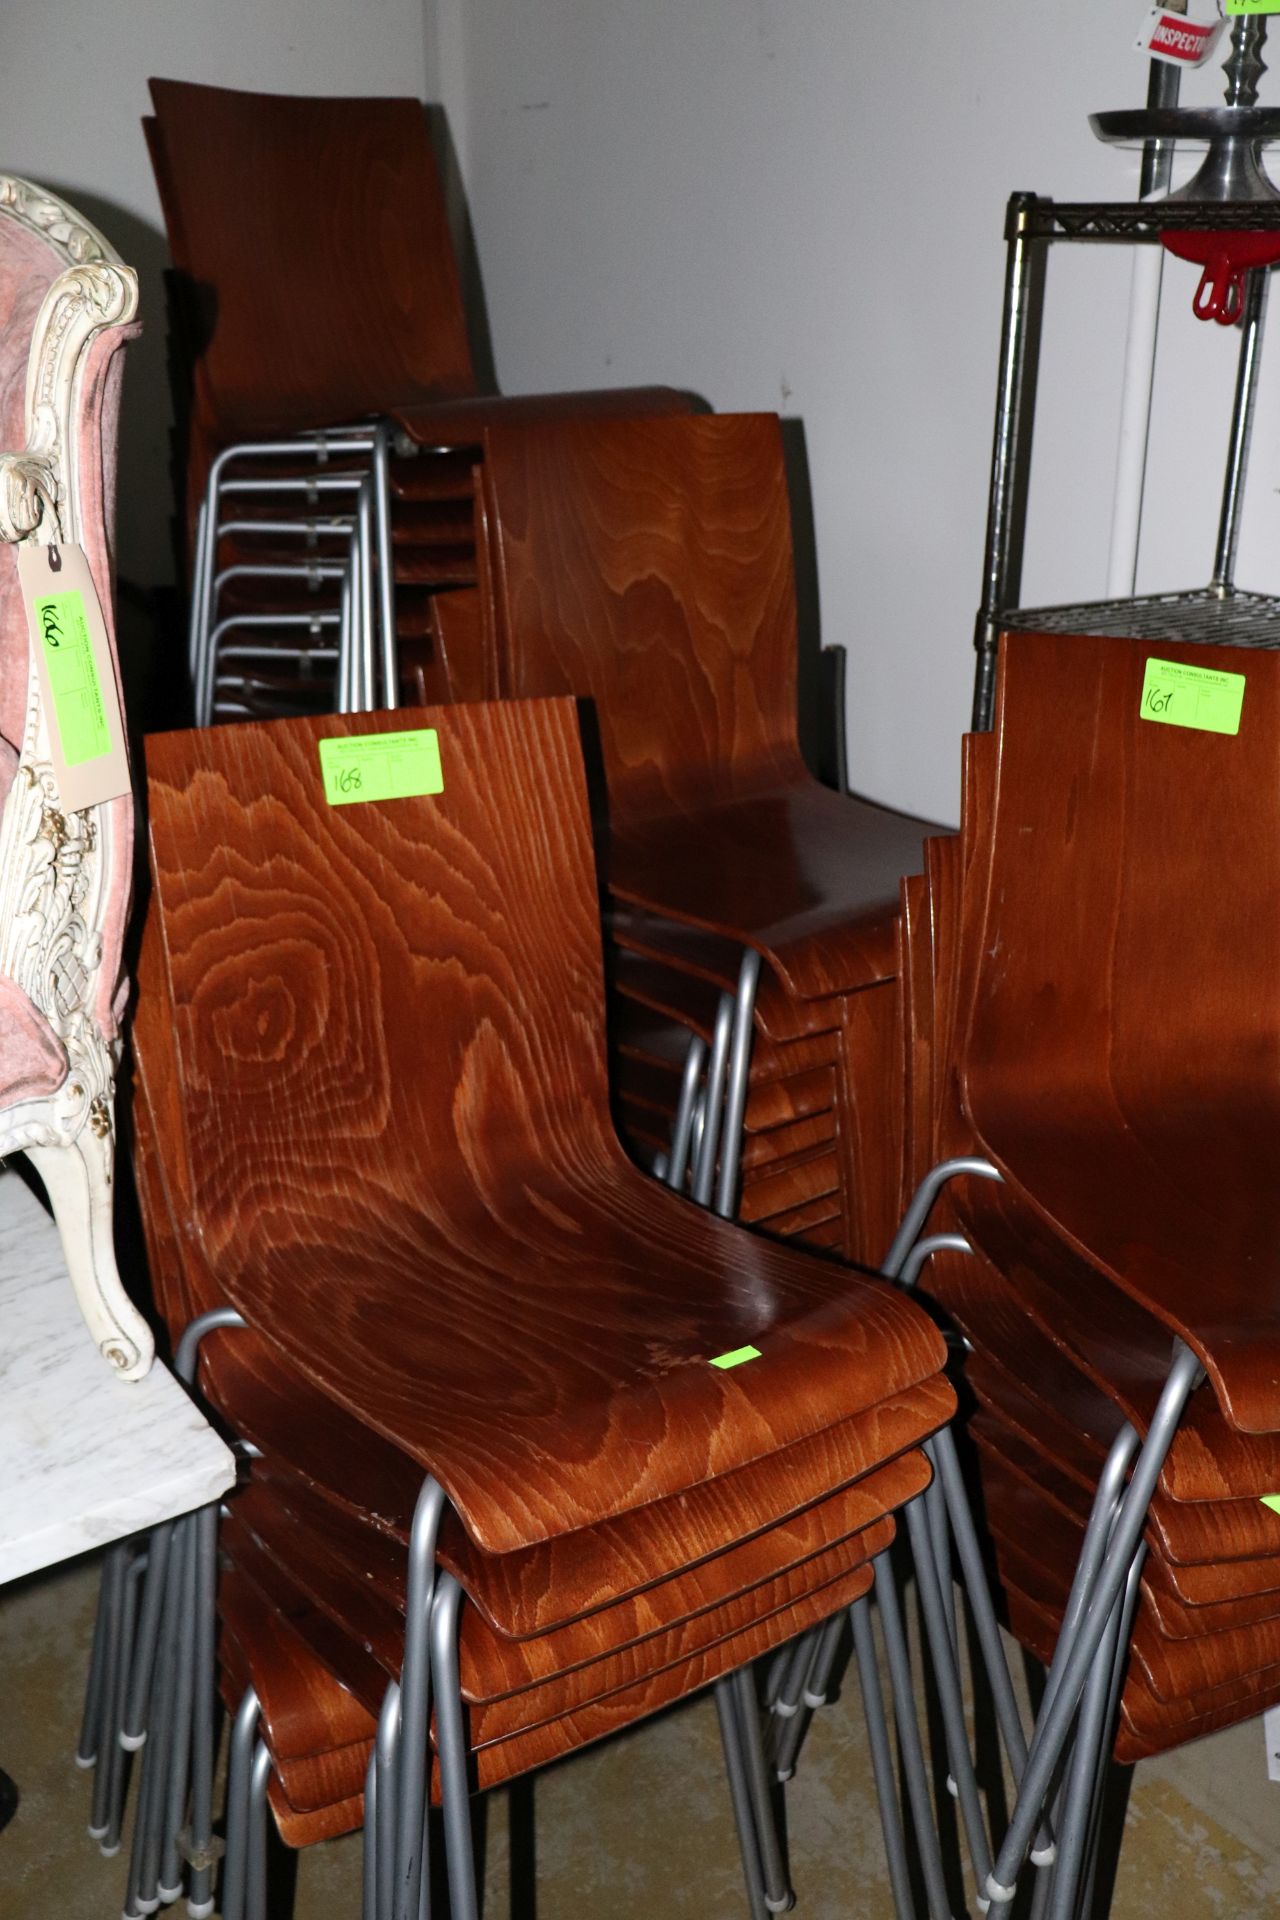 Choice of 8 Chairs, First come first pick